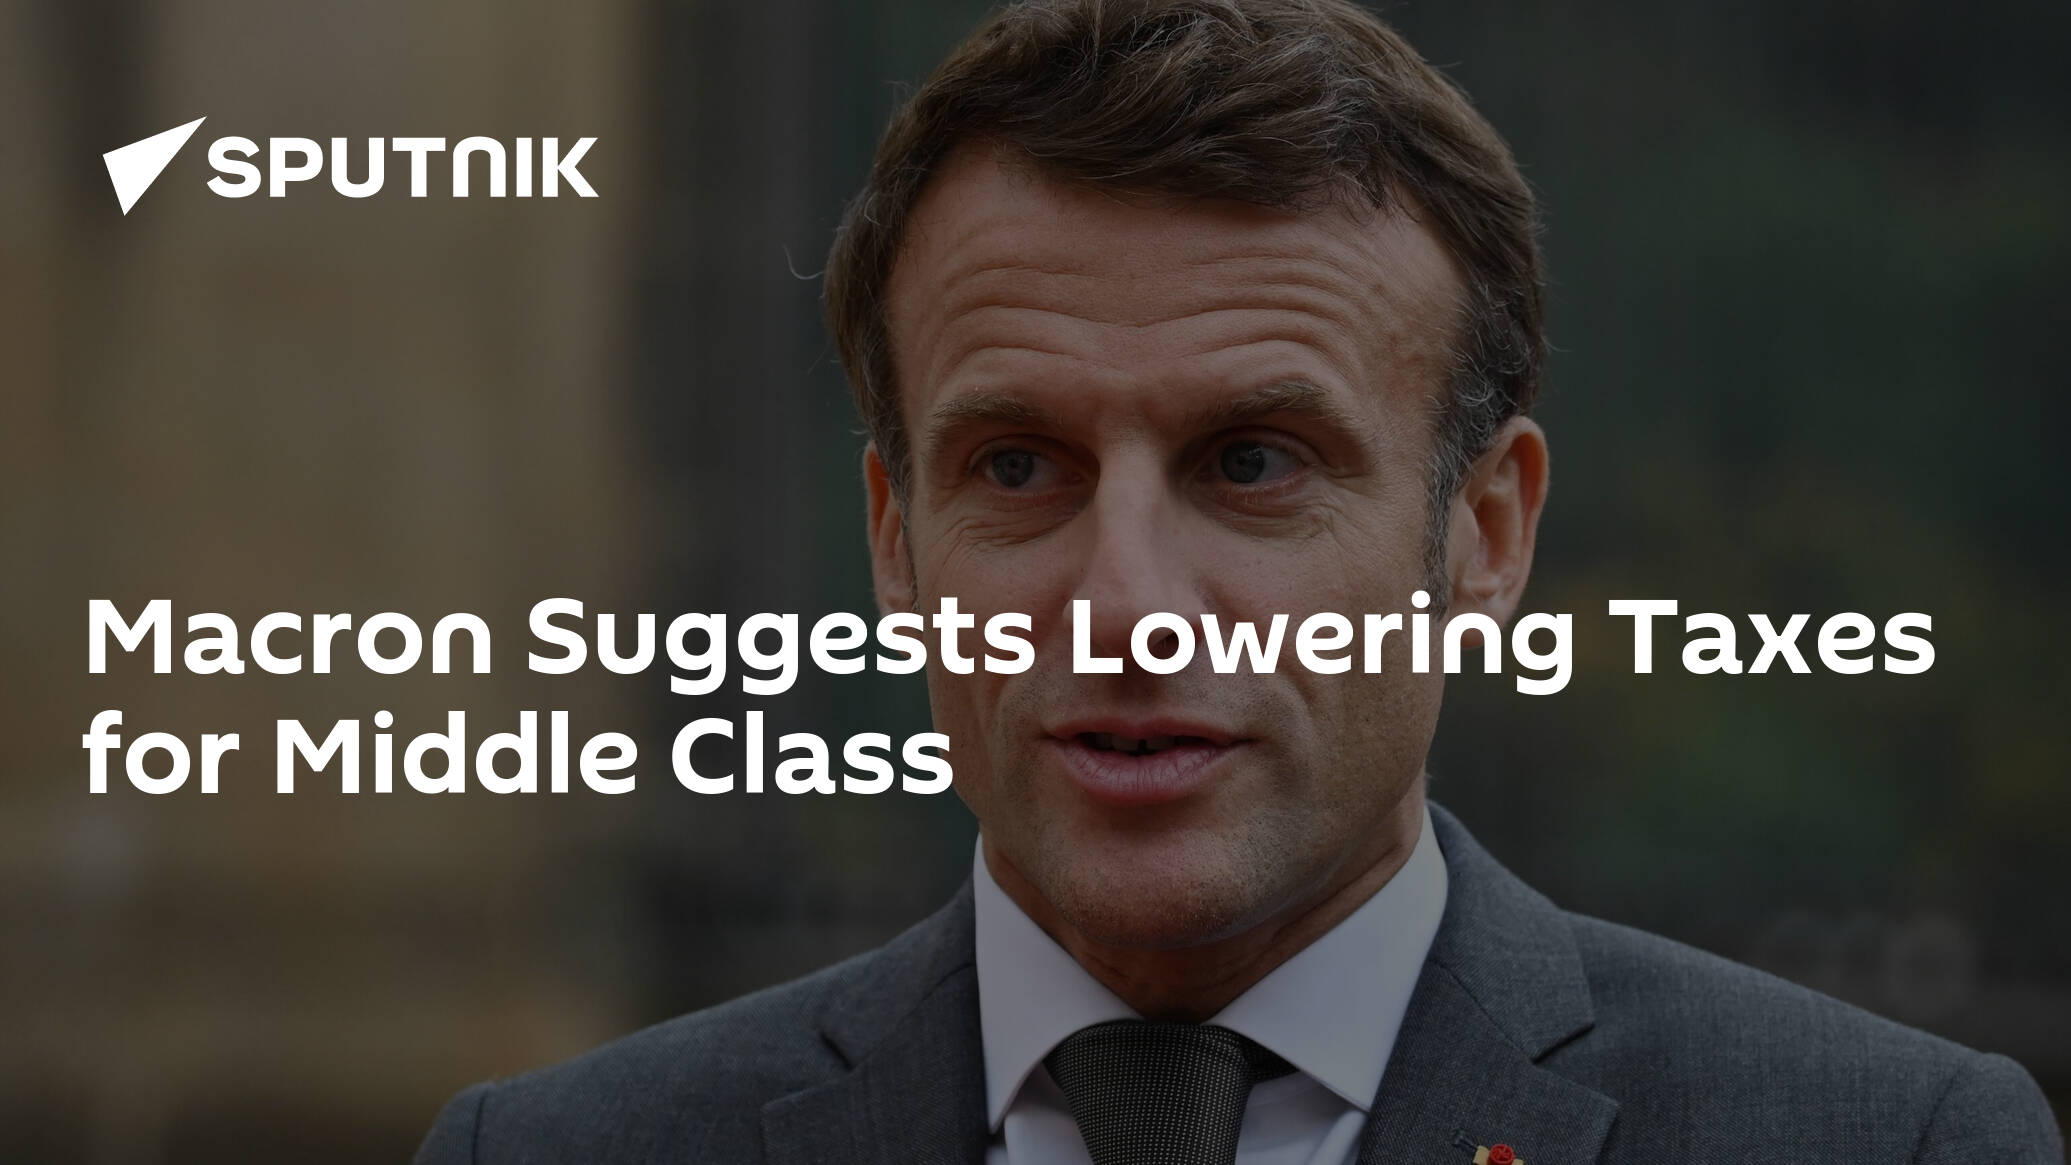 Macron Suggests Lowering Taxes for Middle Class